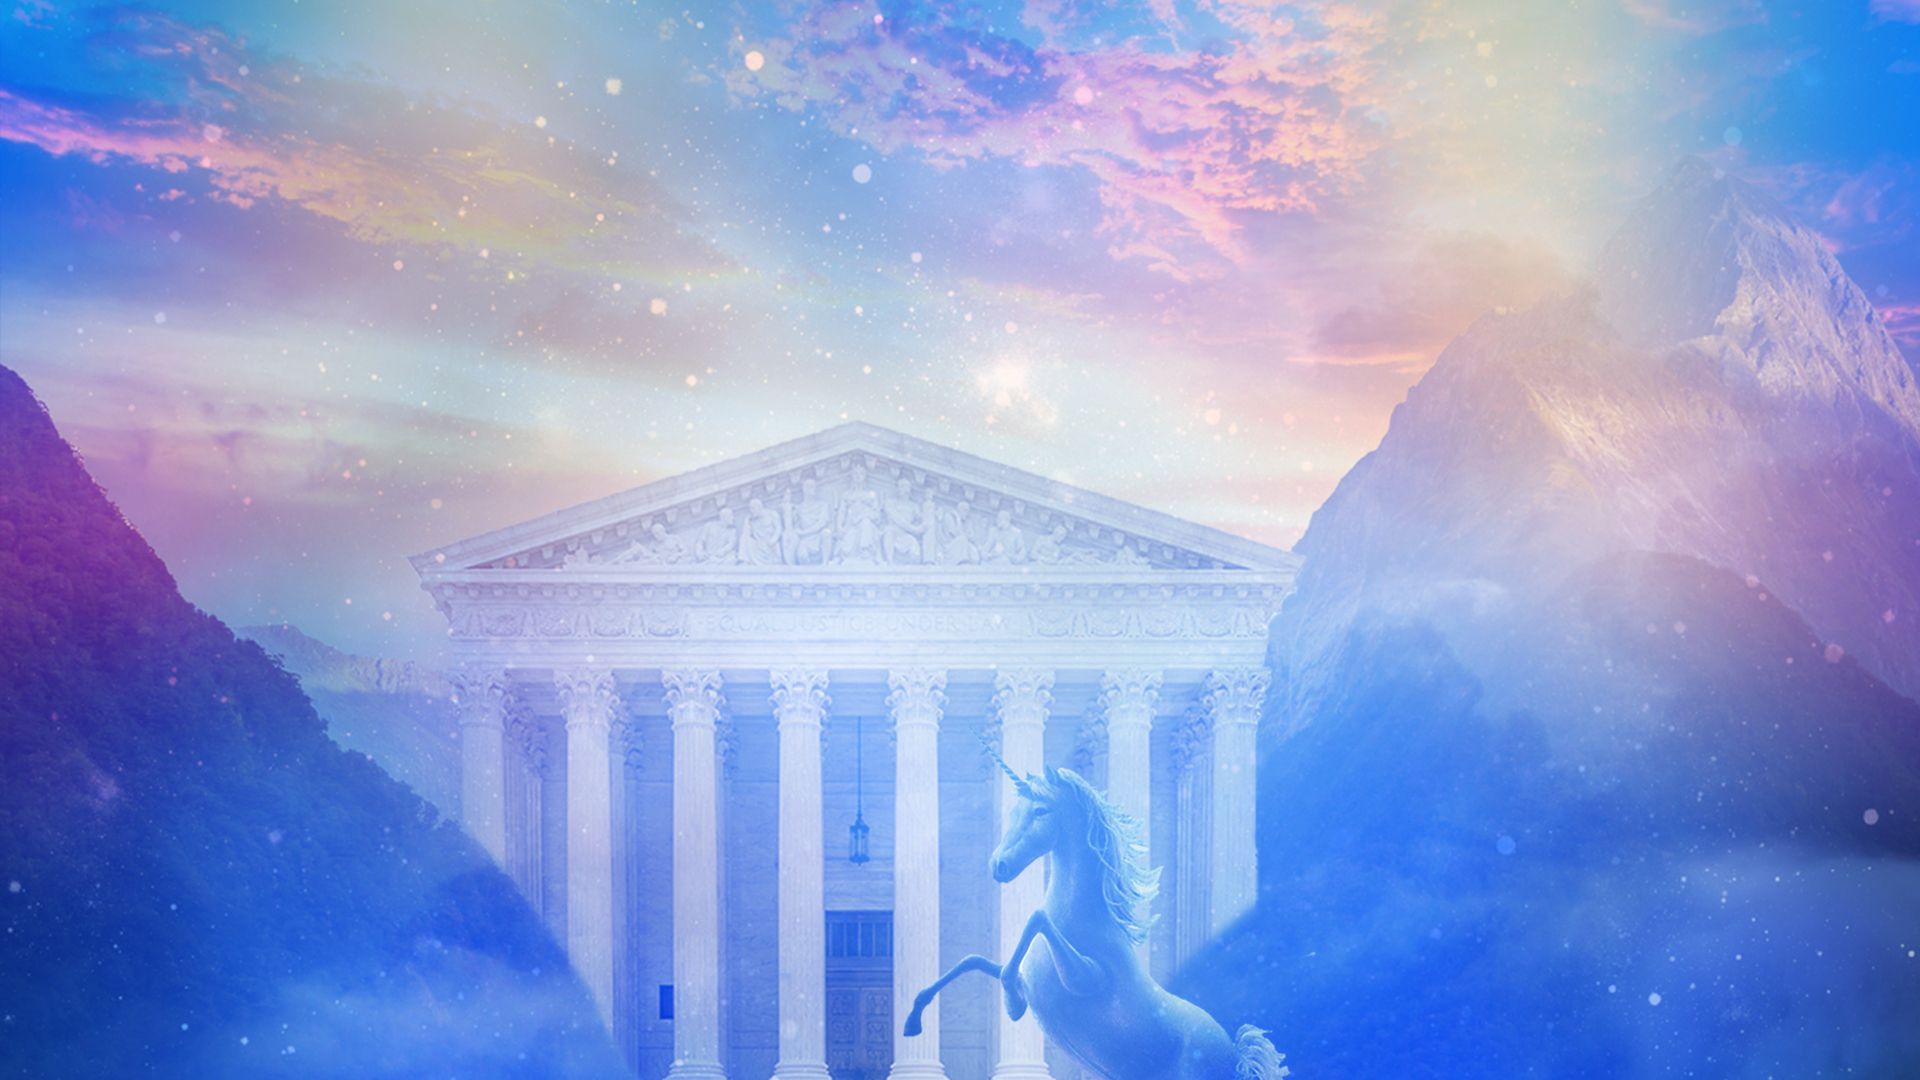 An illustration of the Supreme Court surrounded by pink and purple clouds with a unicorn in front of it 